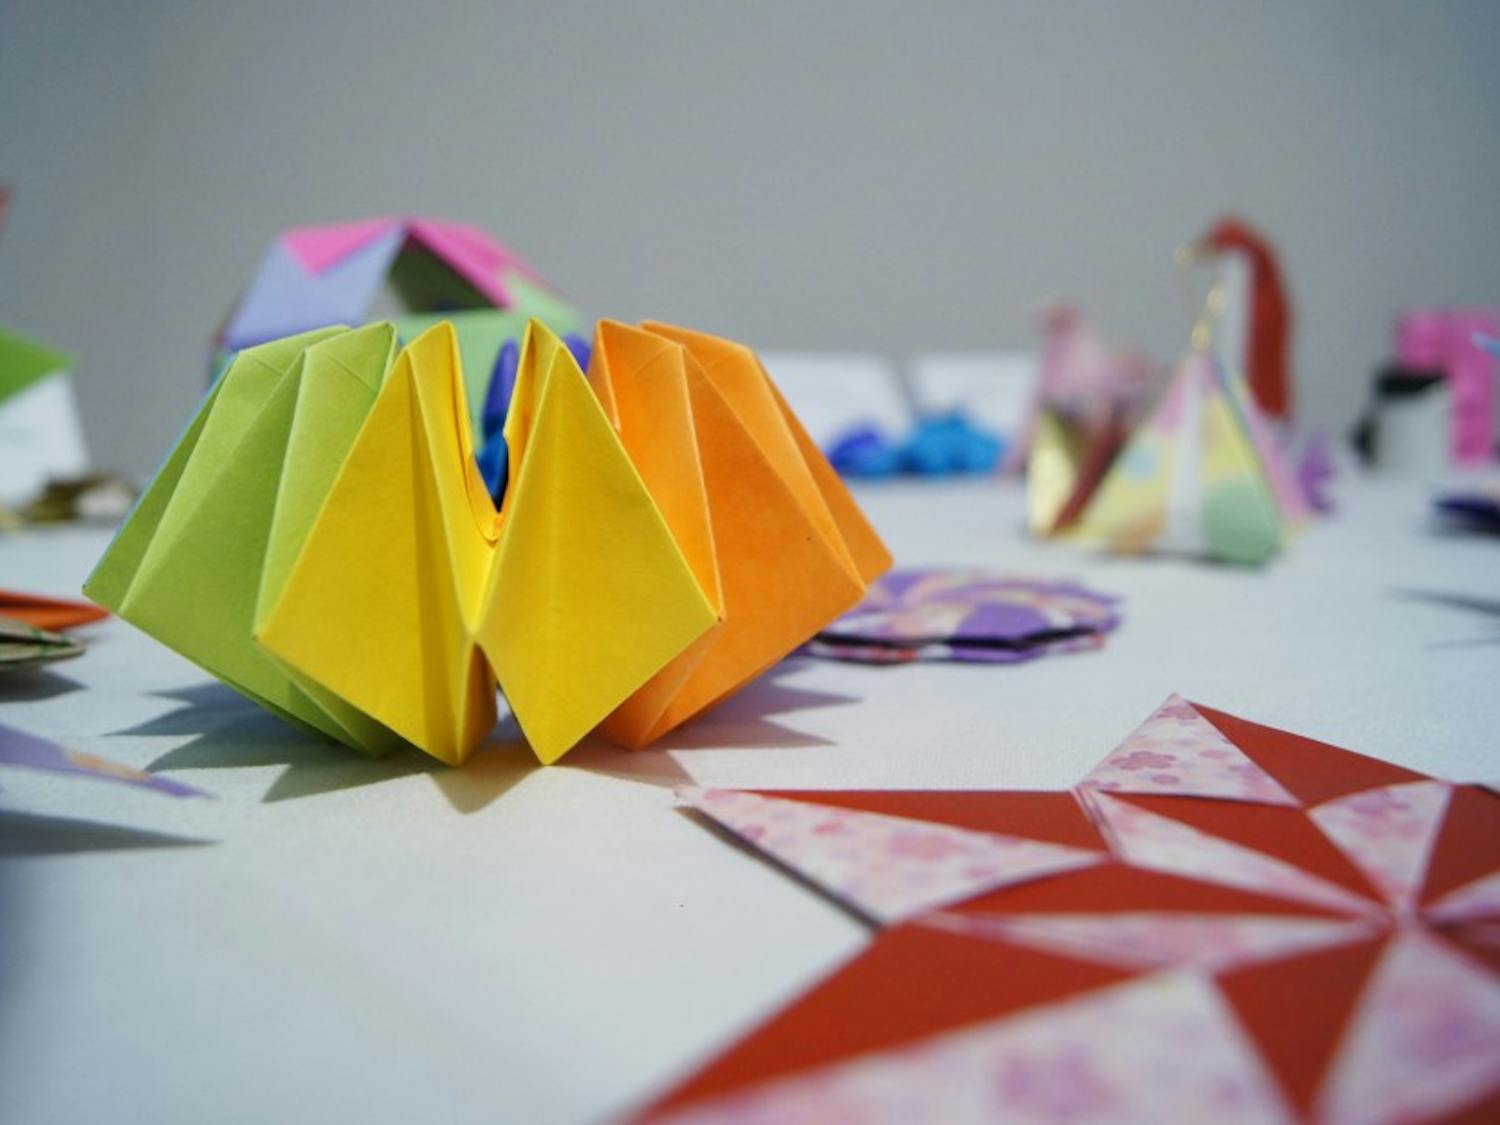 Children create Japanese crafts at the Ackland Art Museum in celebration of Bunka-no-hi (Culture Day) in Japan.